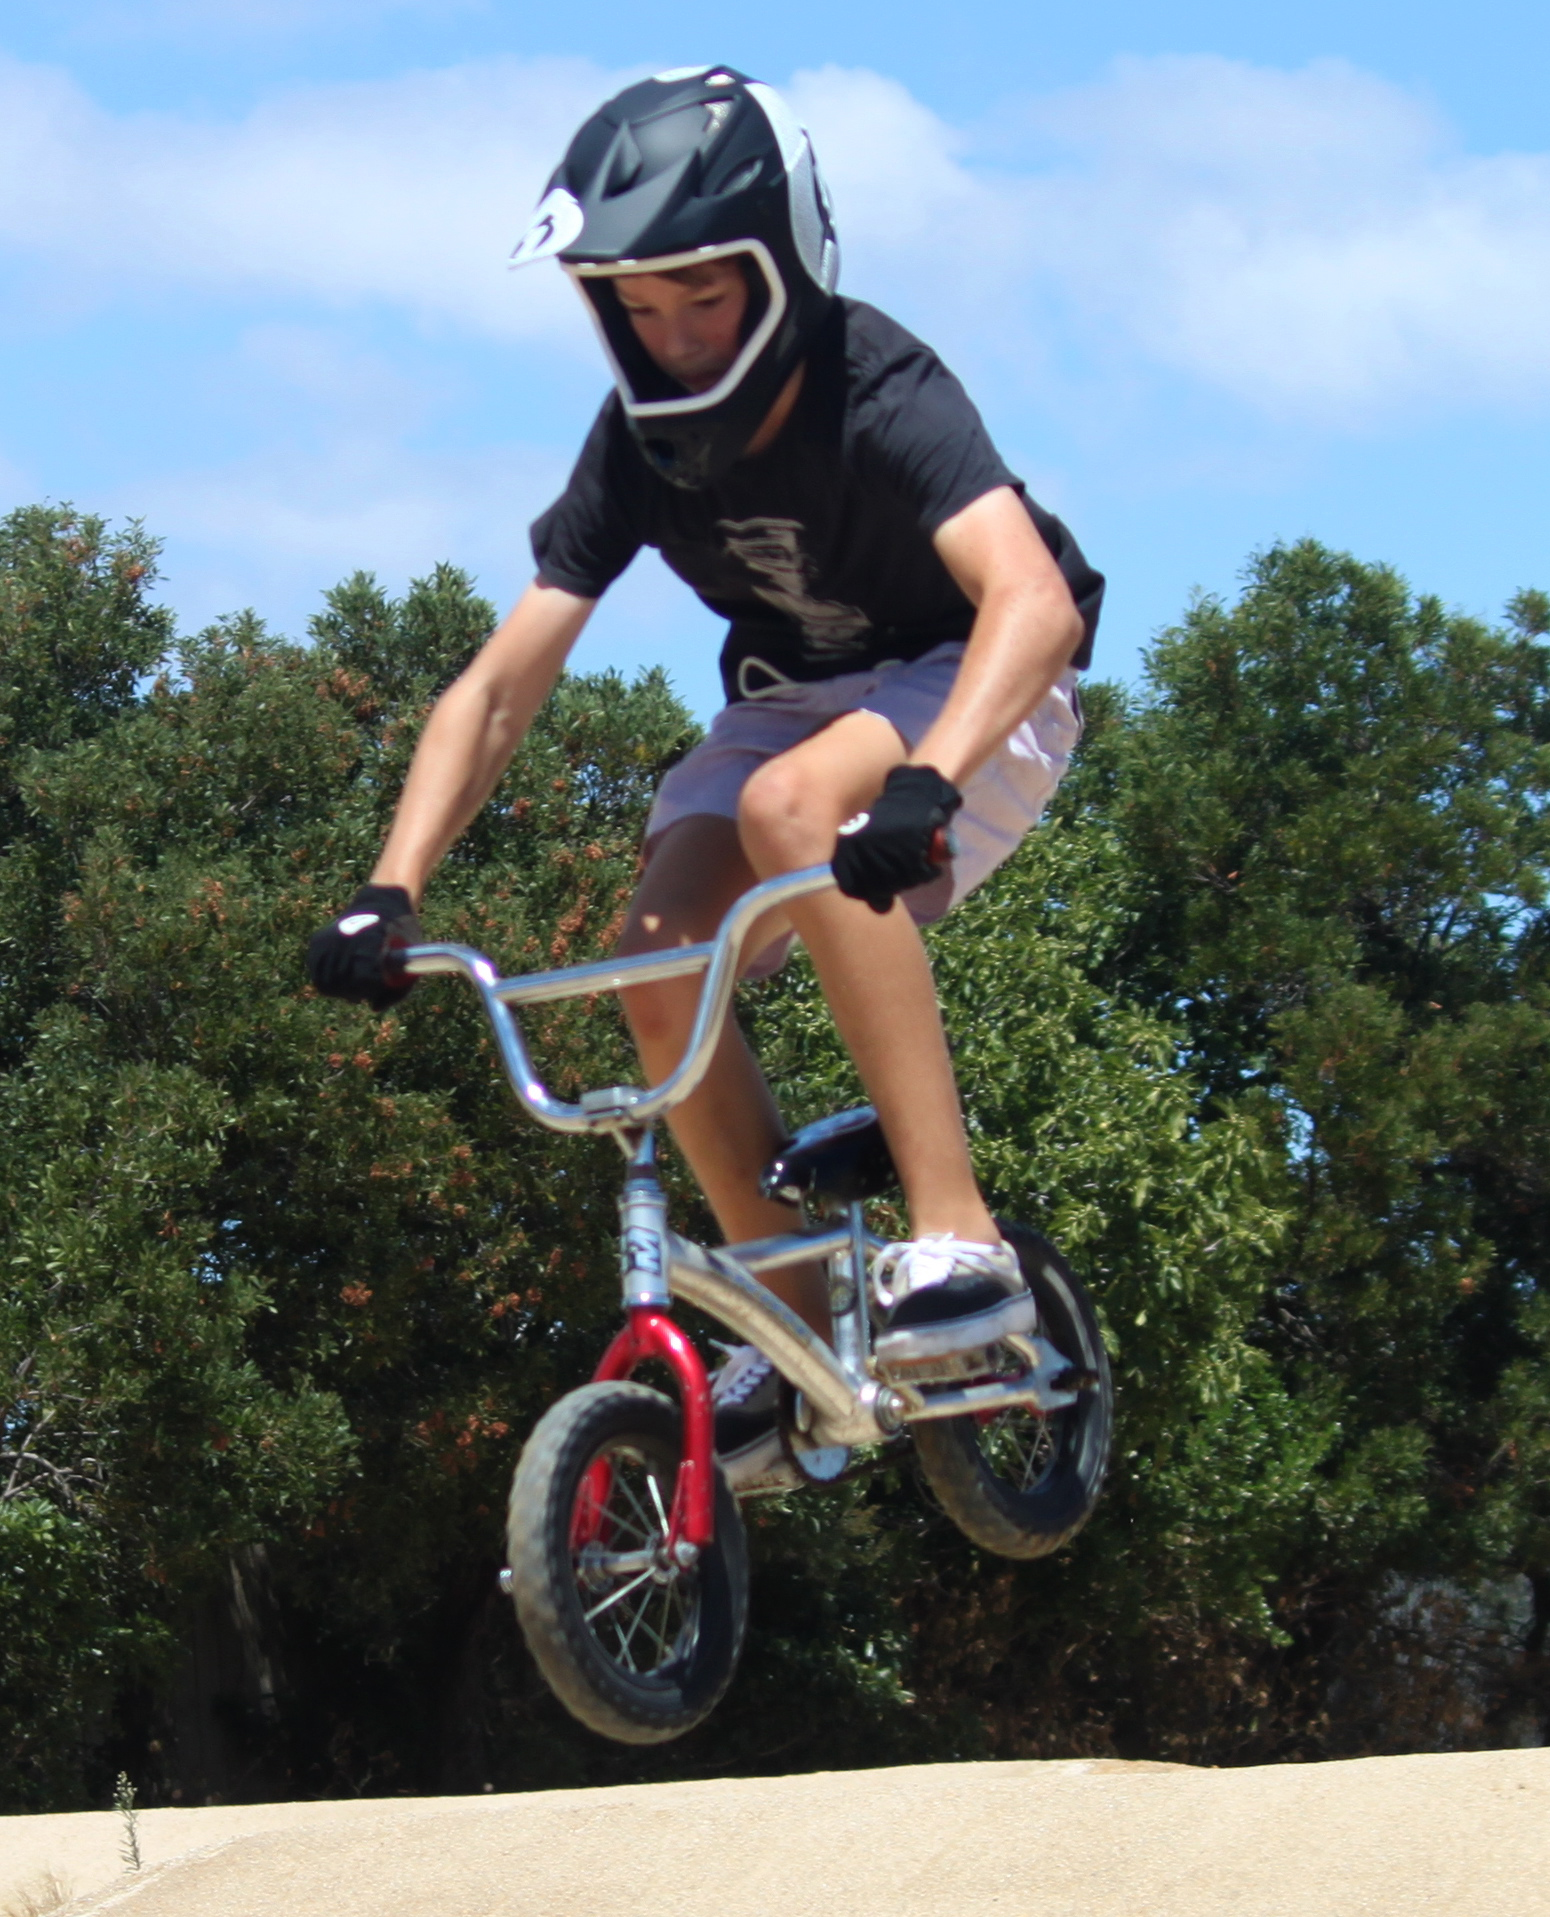 Ben built his first mini bike out of spare BMX parts.